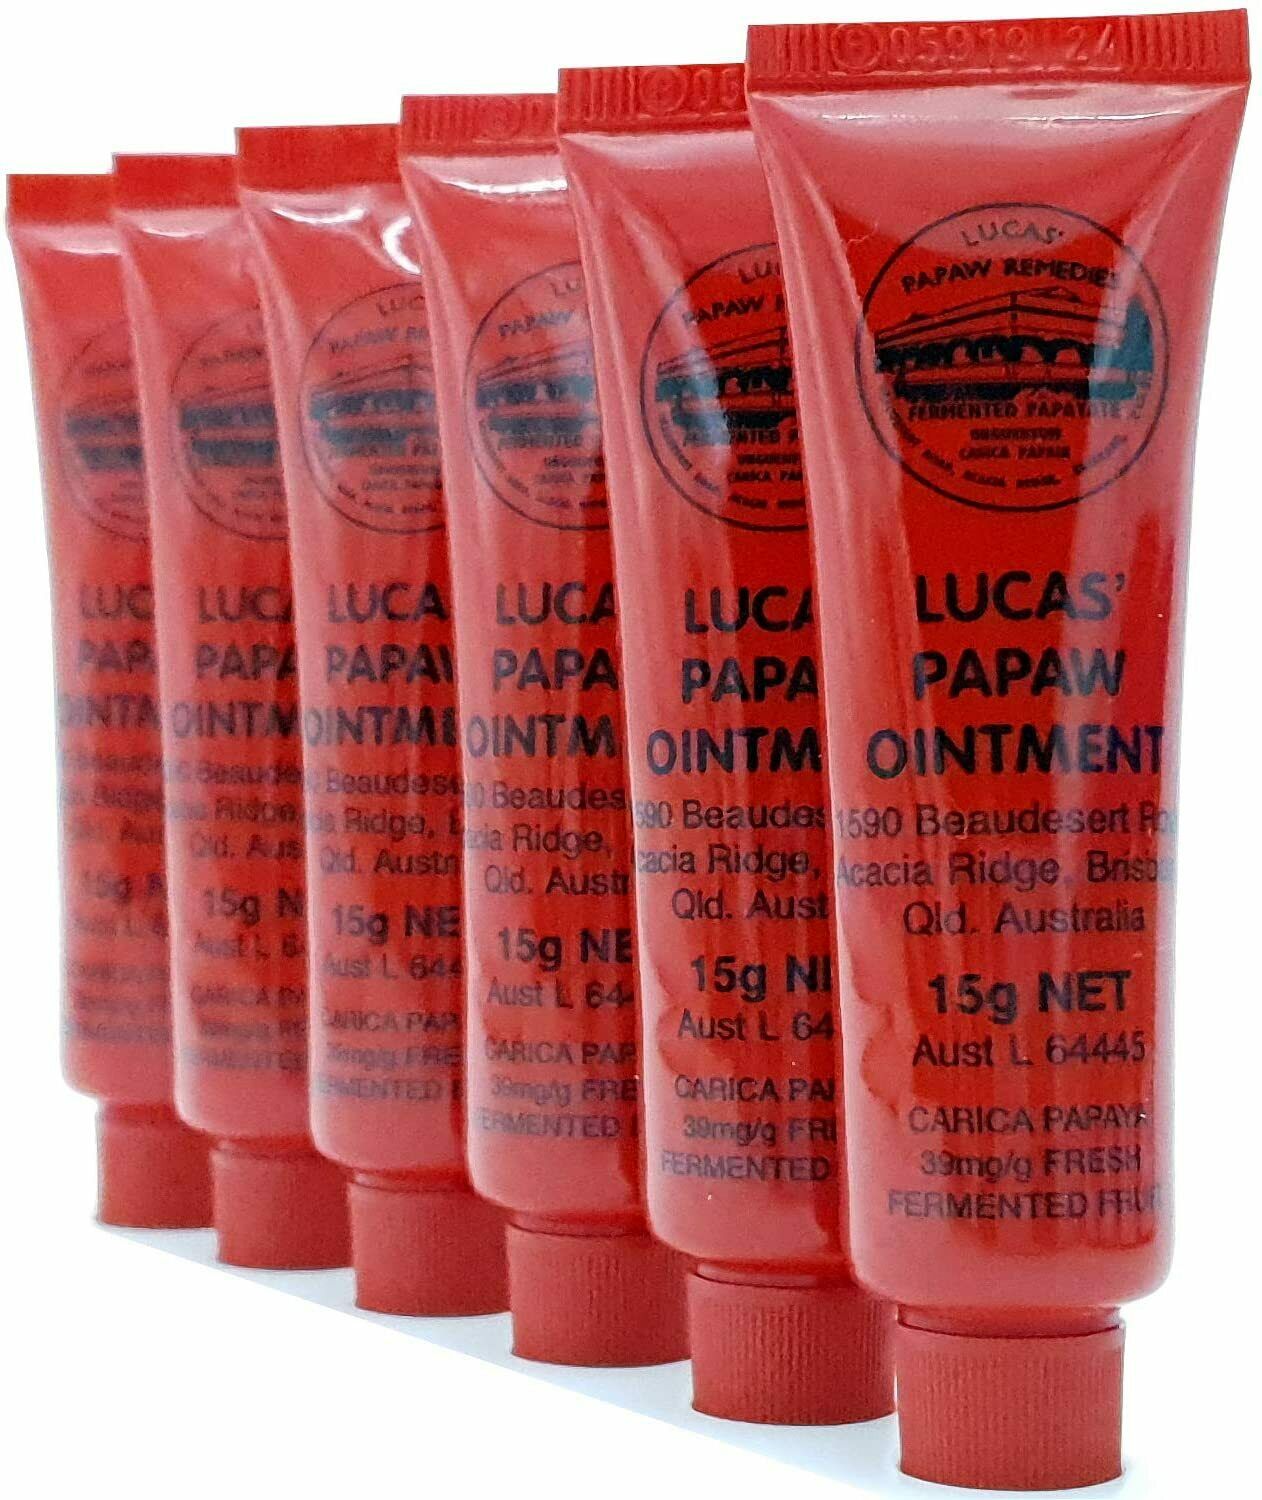 LUCAS' PAPAW OINTMENT Remedies 6 x 15g with Applicator – Scown's Pharmacy